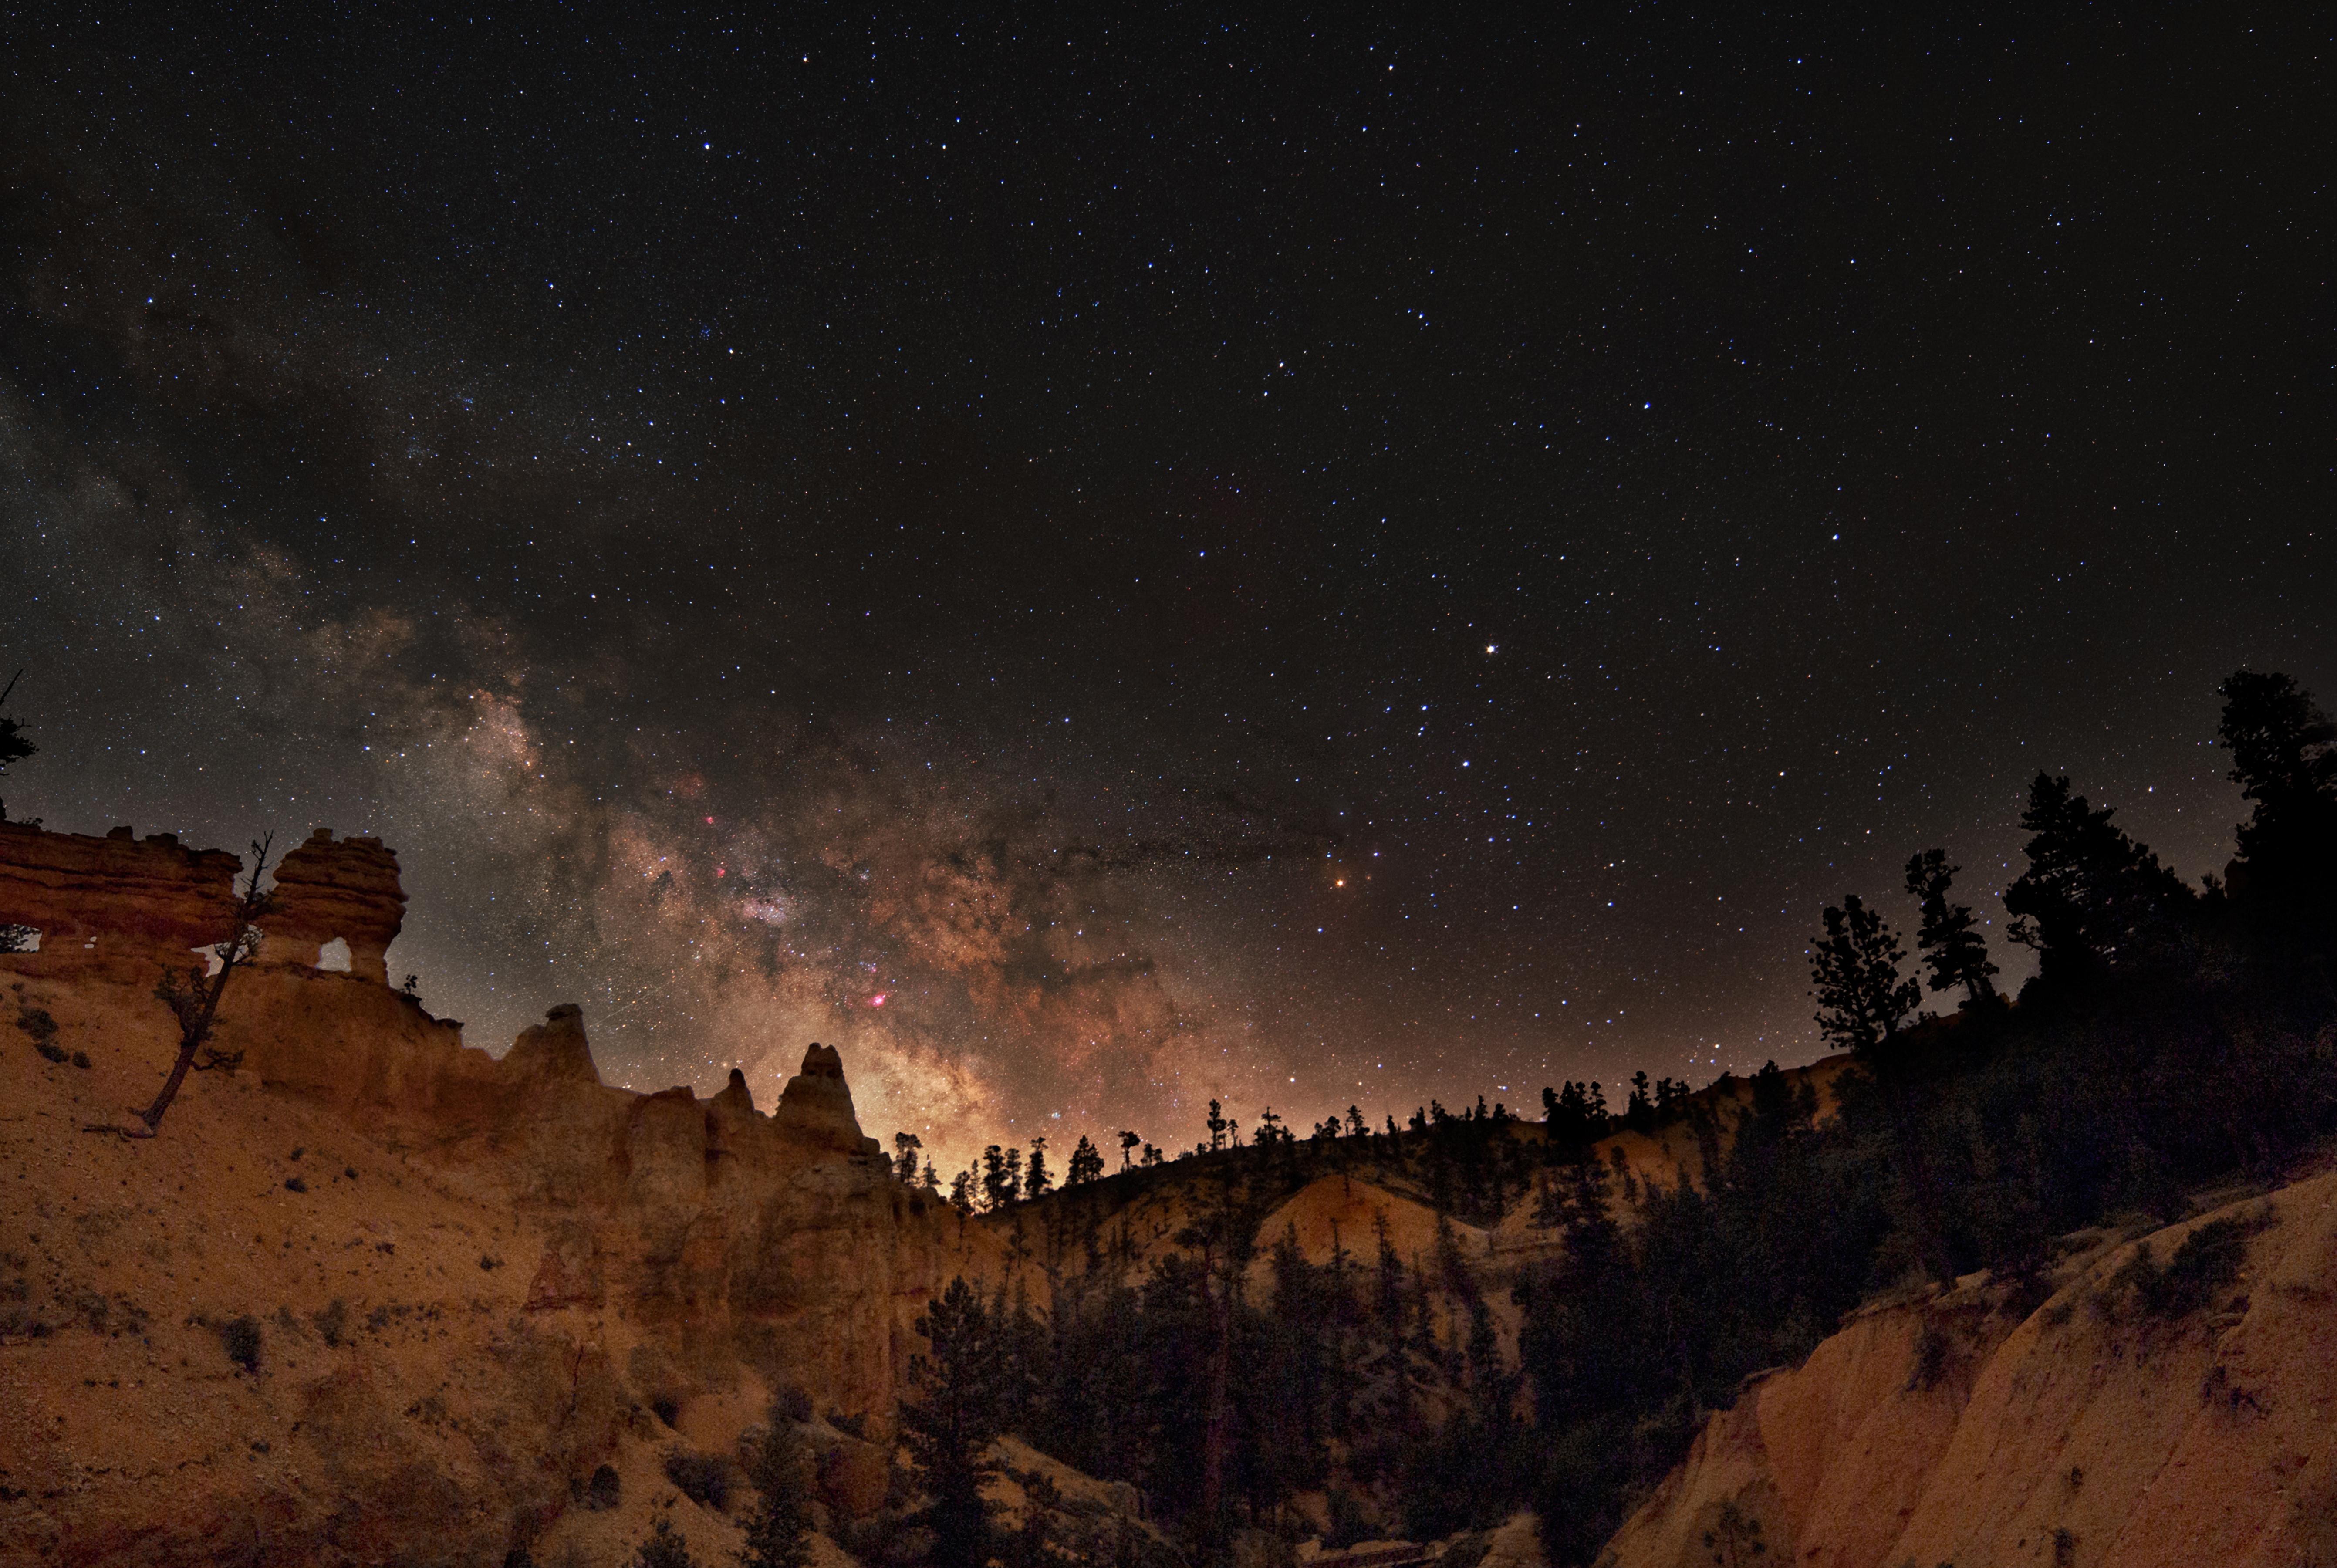 The center of the Milky Way galaxy is seen rising above a horizon of forest and red rock spires